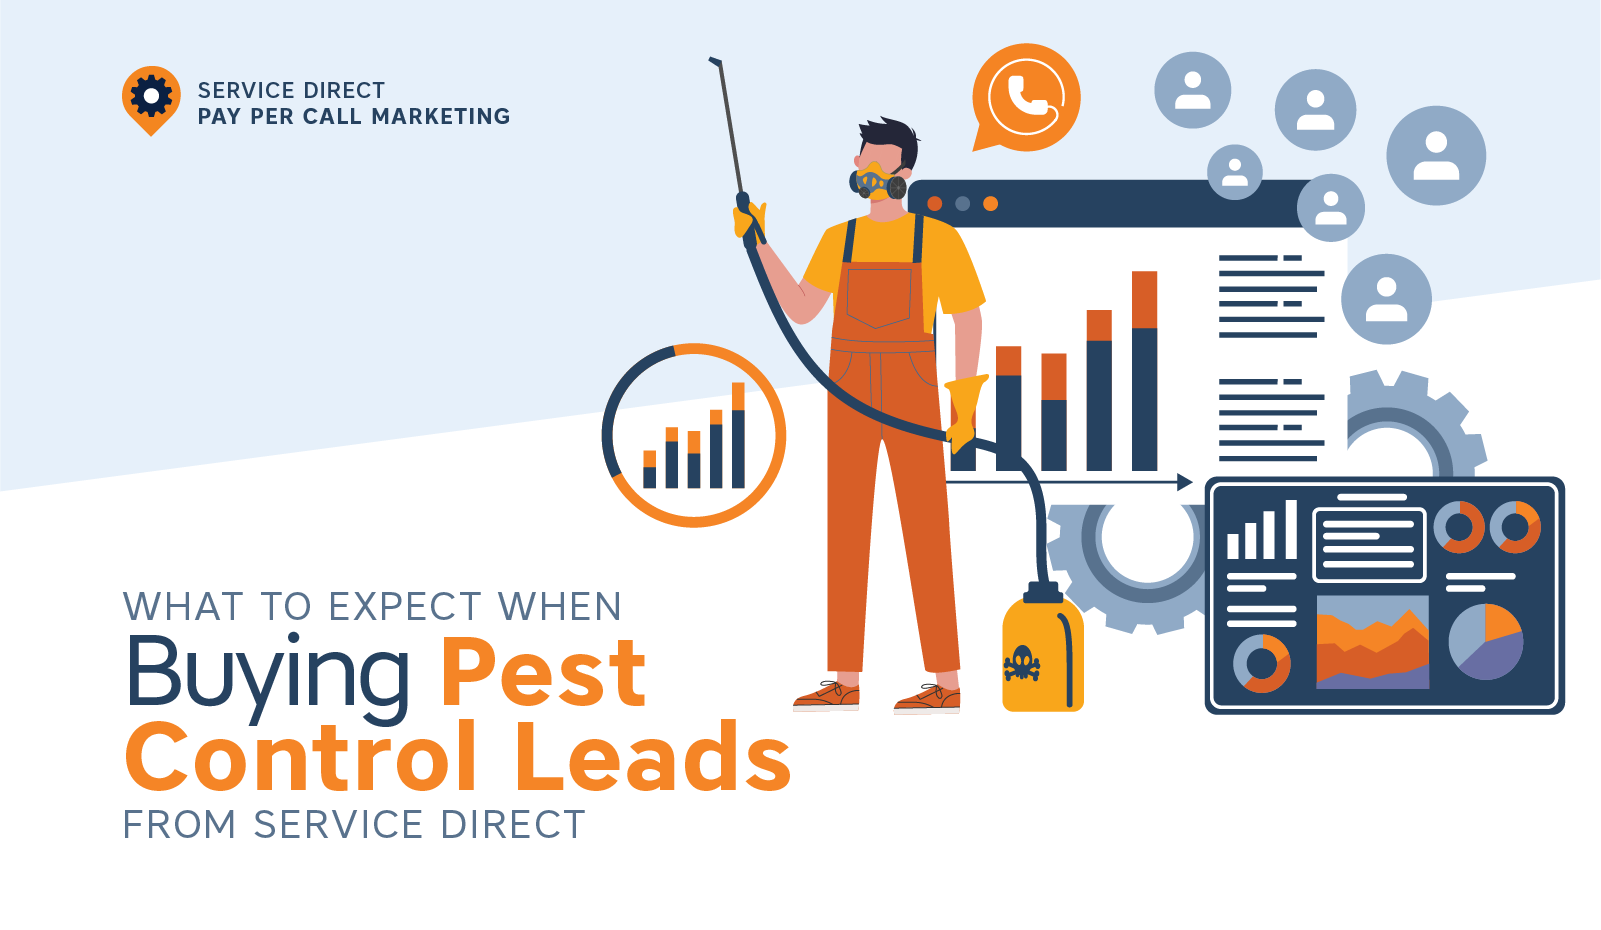 What to Expect When Buying Pest Control Leads from Service Direct